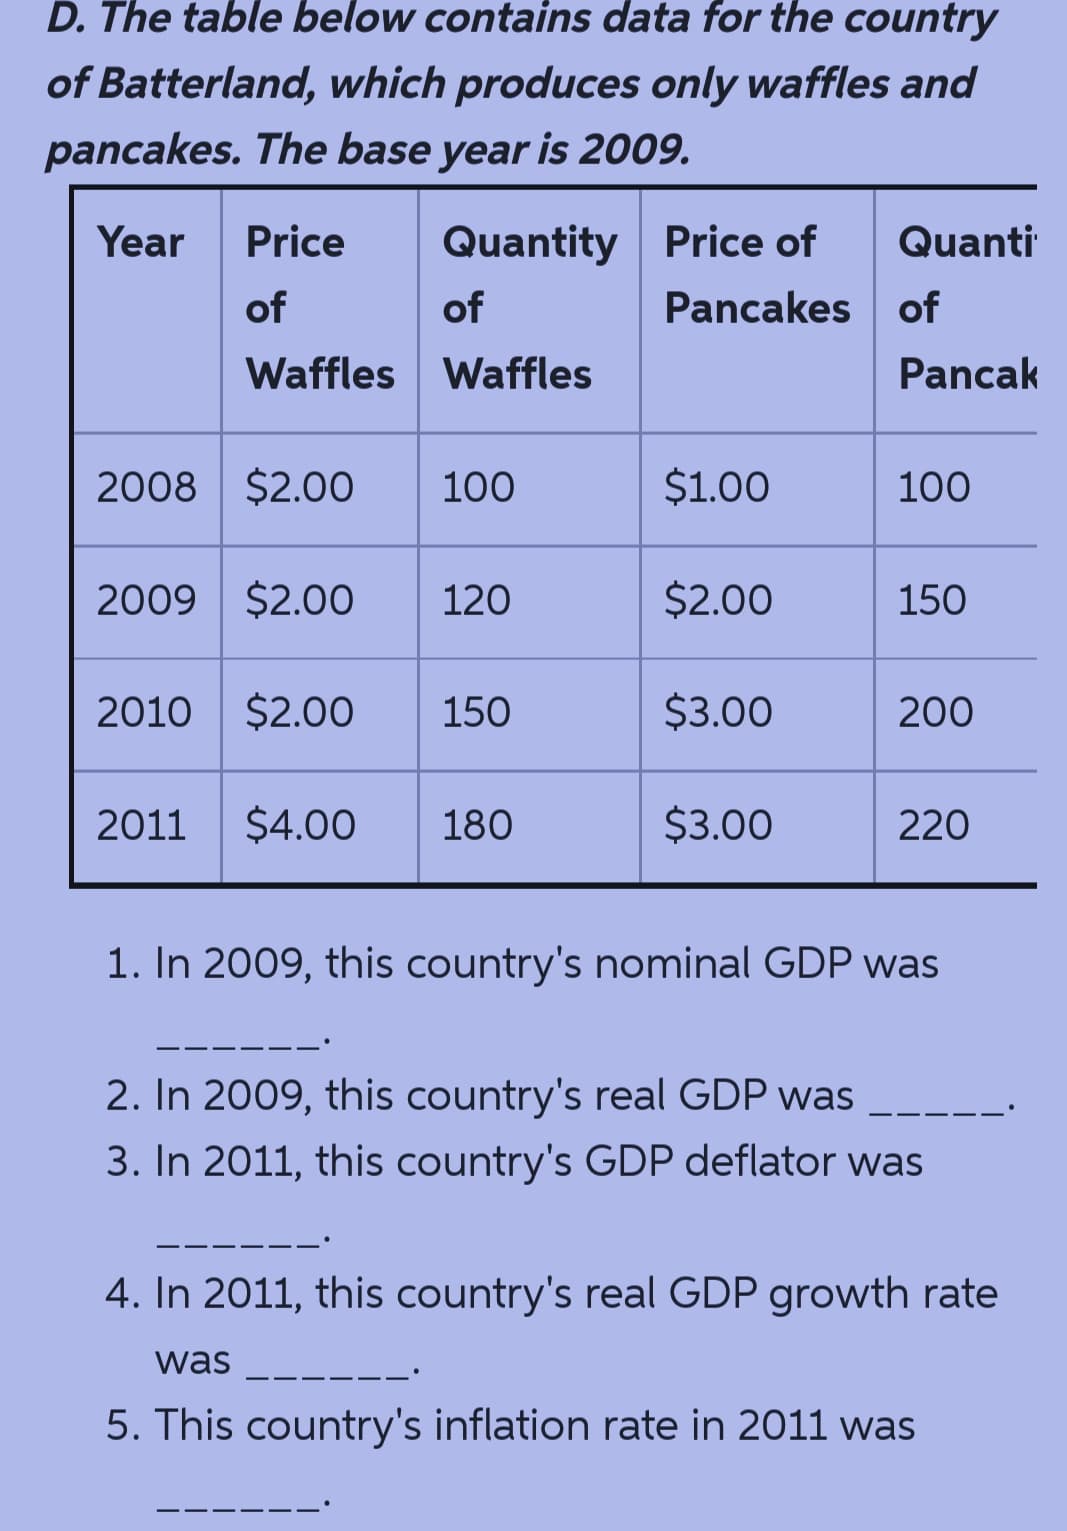 D. The table below contains data for the country
of Batterland, which produces only waffles and
pancakes. The base year is 2009.
Year
Price
Quantity Price of
Quanti
of
of
Pancakes of
Waffles Waffles
Pancak
2008 $2.00
100
$1.00
100
2009
$2.00
120
$2.00
150
2010 $2.0O
150
$3.00
200
2011
$4.00
180
$3.00
220
1. In 2009, this country's nominal GDP was
2. In 2009, this country's real GDP was
3. In 2011, this country's GDP deflator was
4. In 2011, this country's real GDP growth rate
was
5. This country's inflation rate in 2011 was
